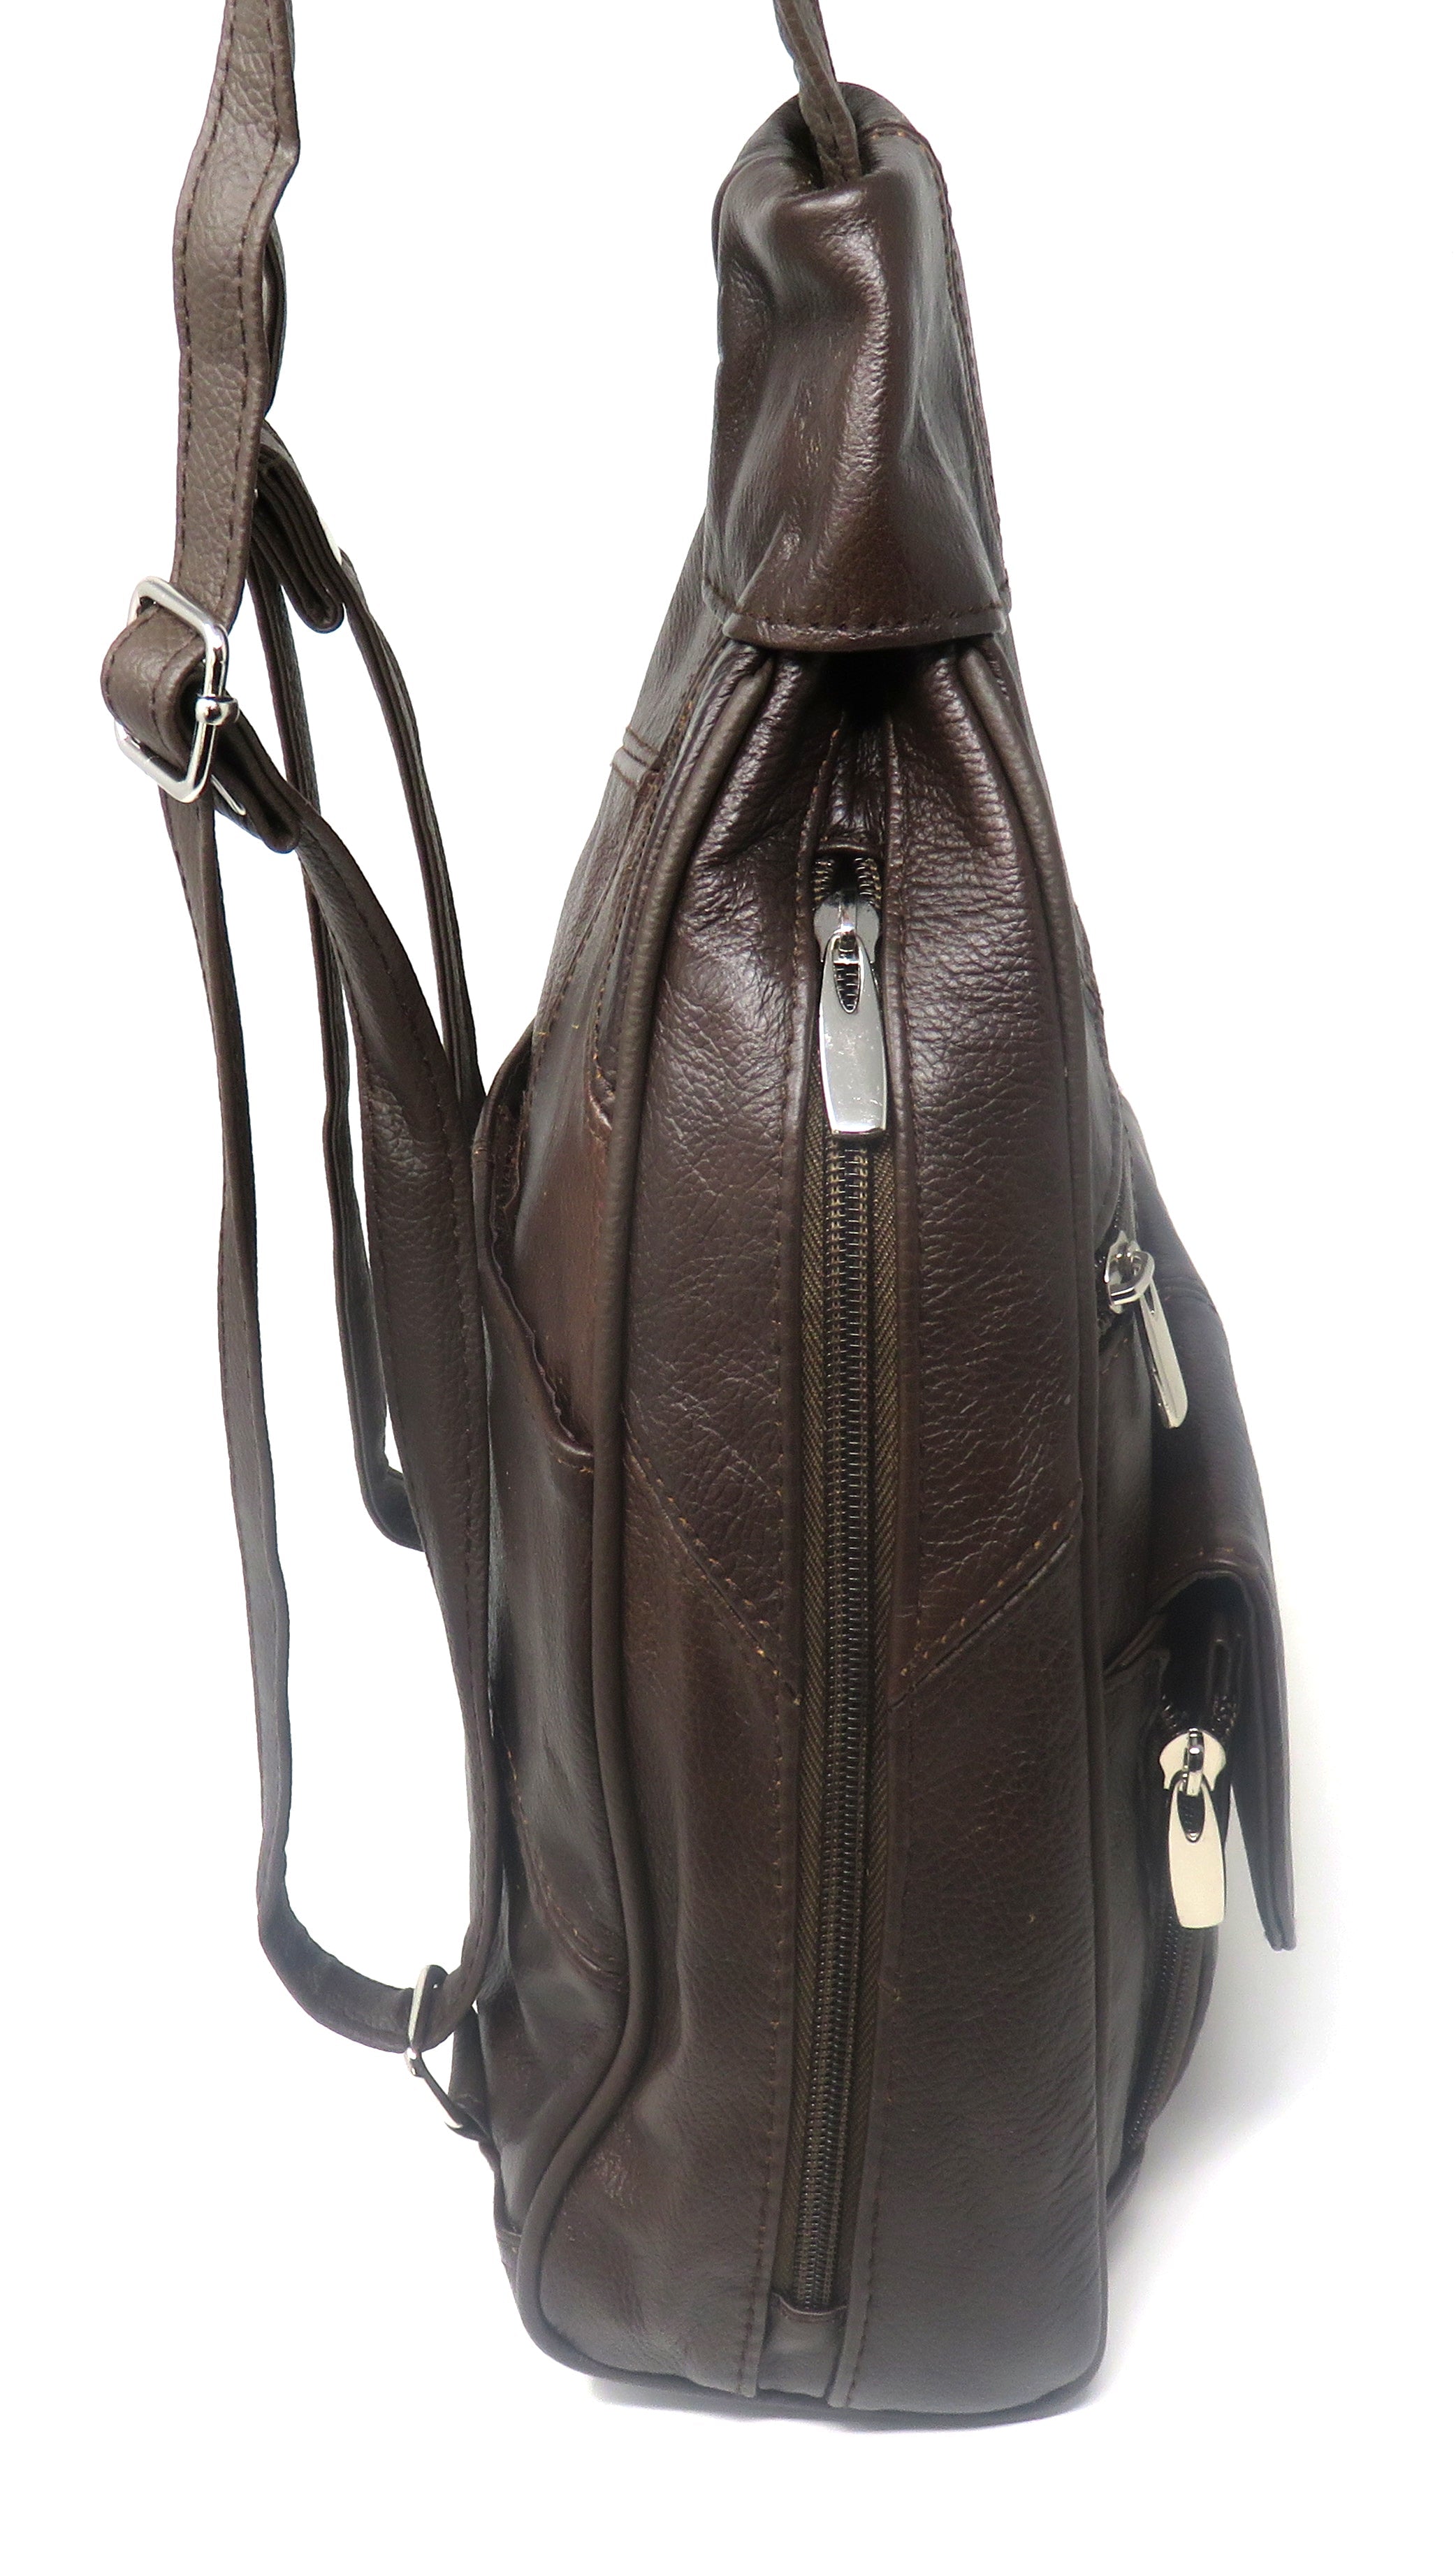 Leather Backpack with Build-in Wallet and Adjustable Straps